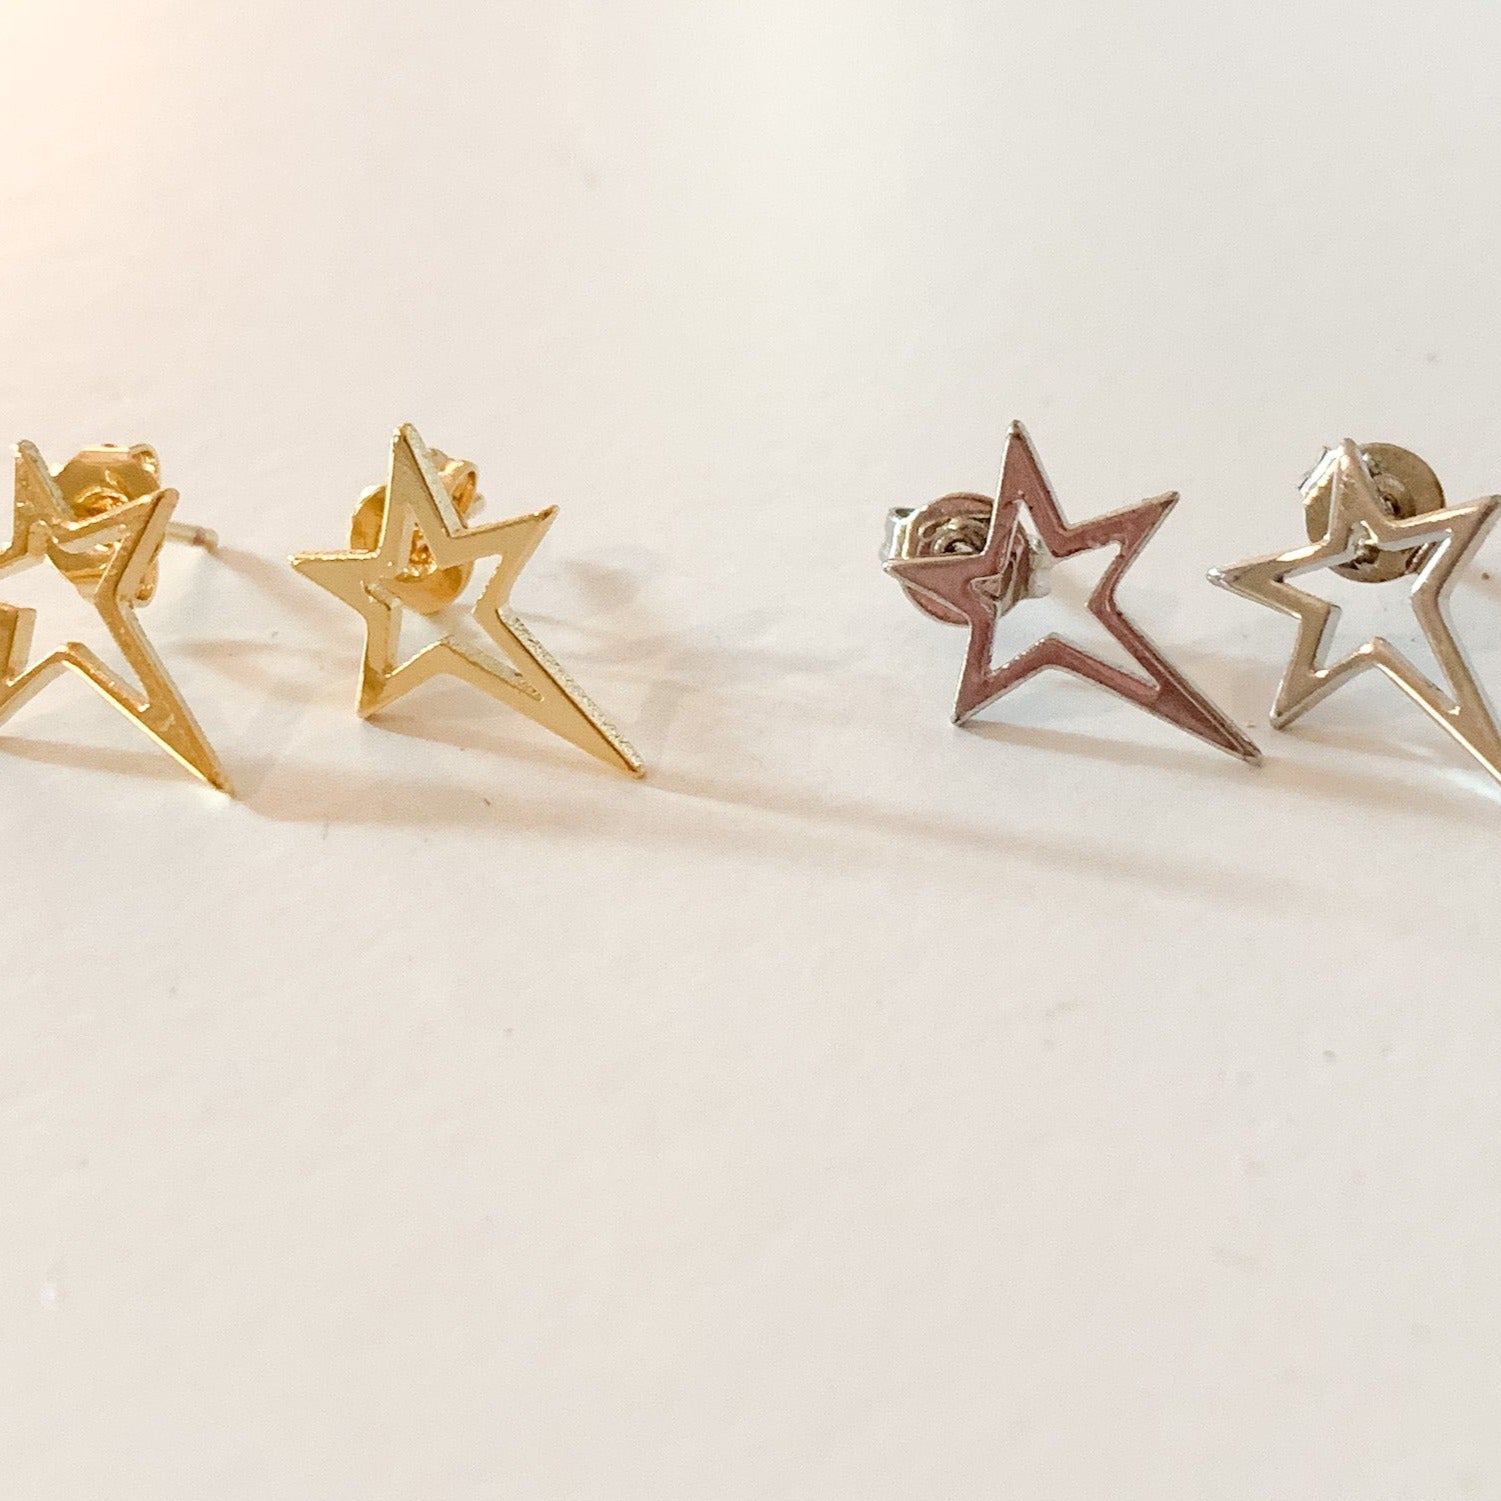 Earrings, Yorkshire - Danshire Market and Design , hooting star studs. The Yorkshire Earrings have been dipped in 14K Gold or White Gold. 